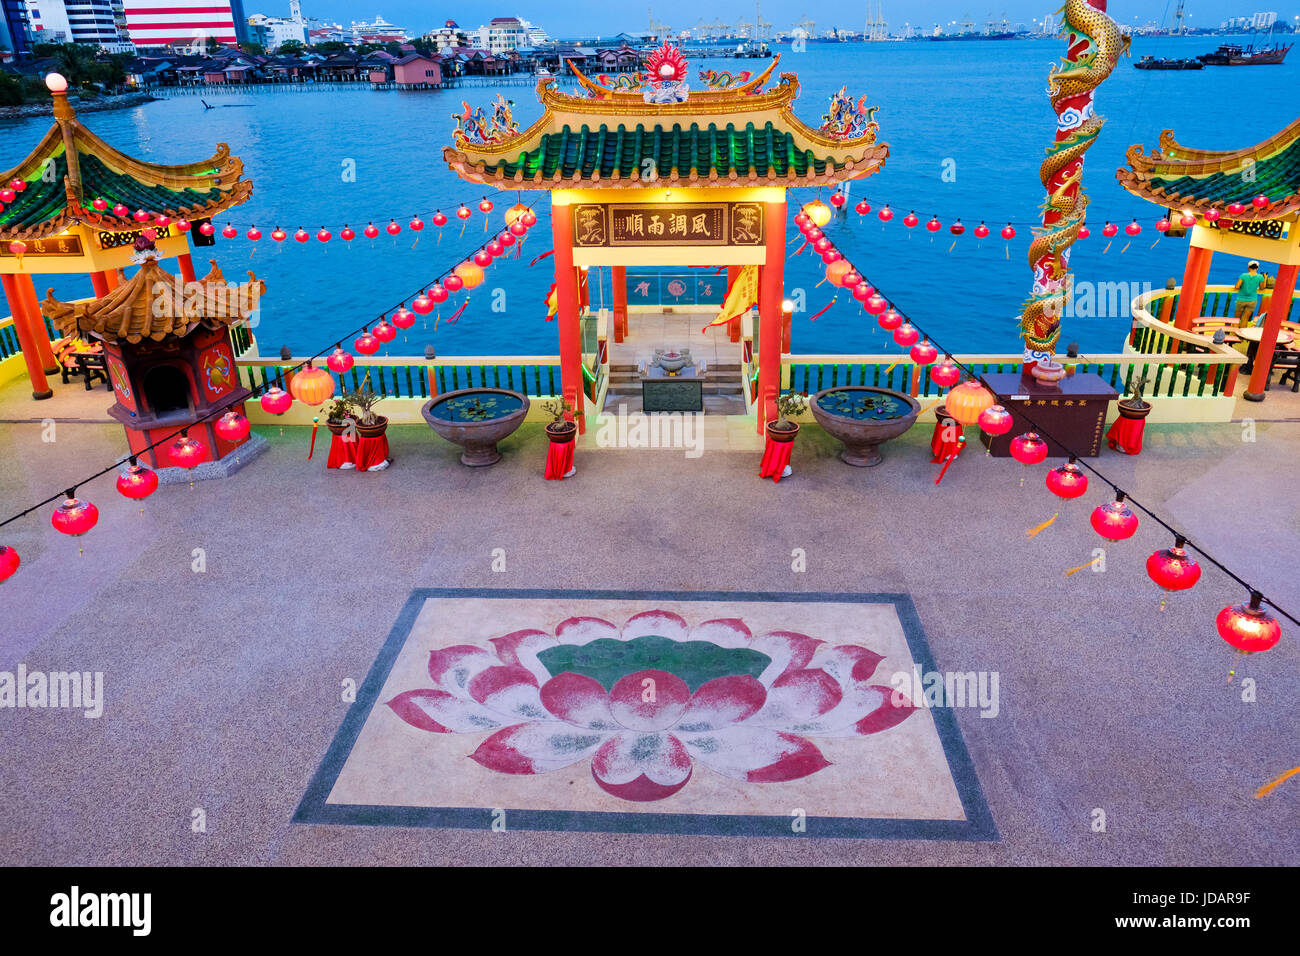 Lower level of Chinese Hean Boo Thean Temple -dedicated to Kuan Yin ('Goddess of Mercy')- at dusk, George Town, Pulau Pinang, Malaysia. Stock Photo